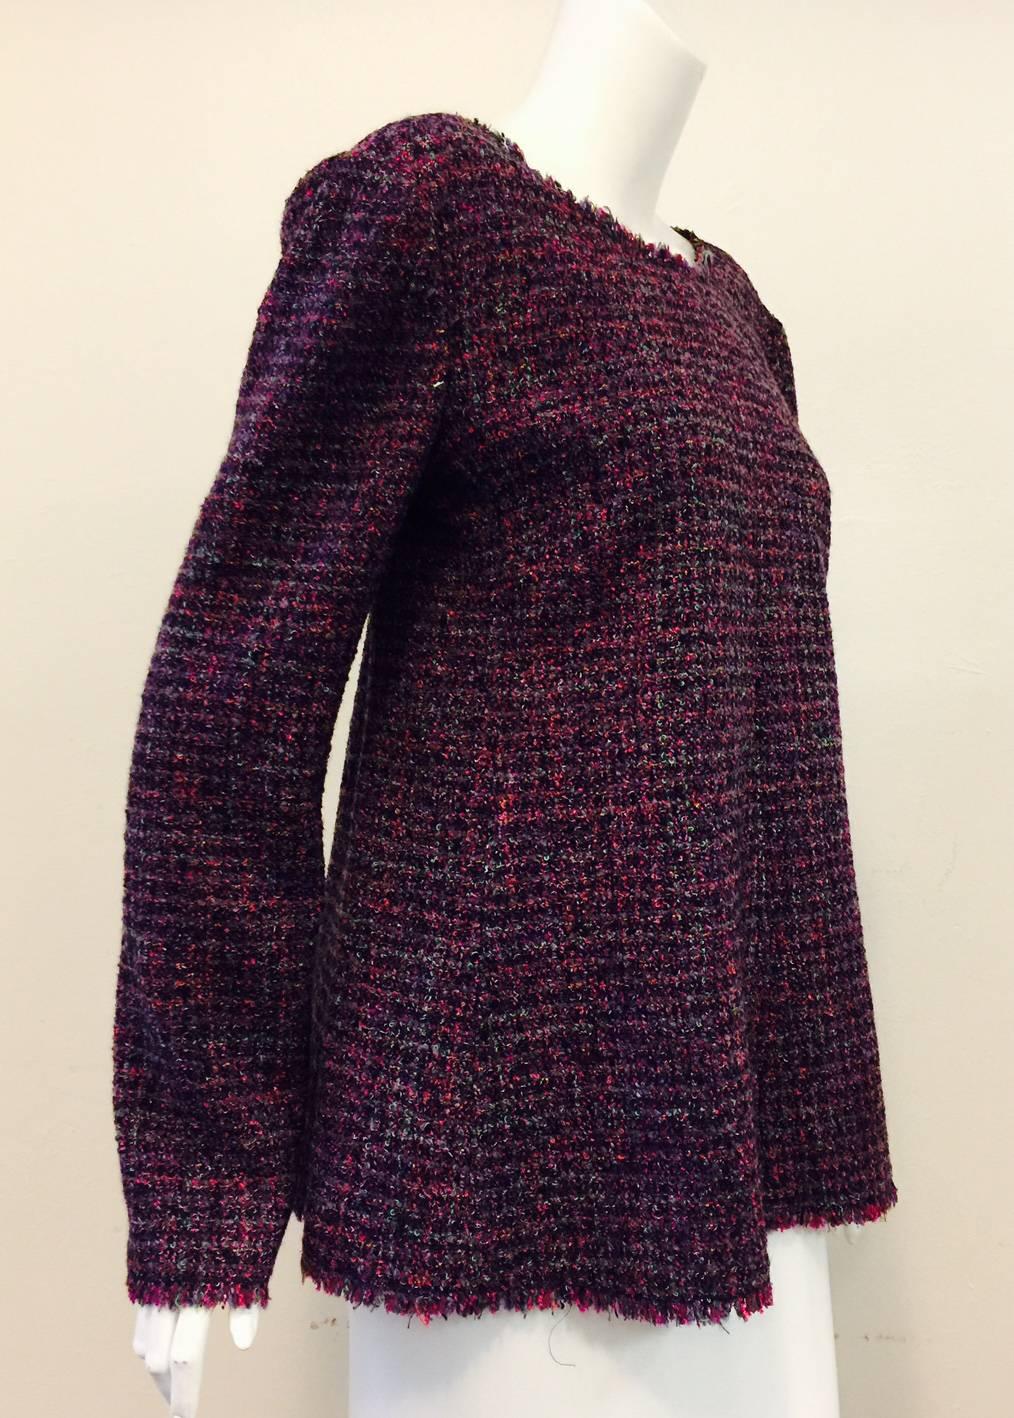 Chanel uses tweed for more than just jackets and skirts!  Aubergine Raspberry and Mint Multi Color Tweed Top is versatile and pure "Coco".  Features modern and sophisticated "swing" silhouette, rounded collar, and rear hidden